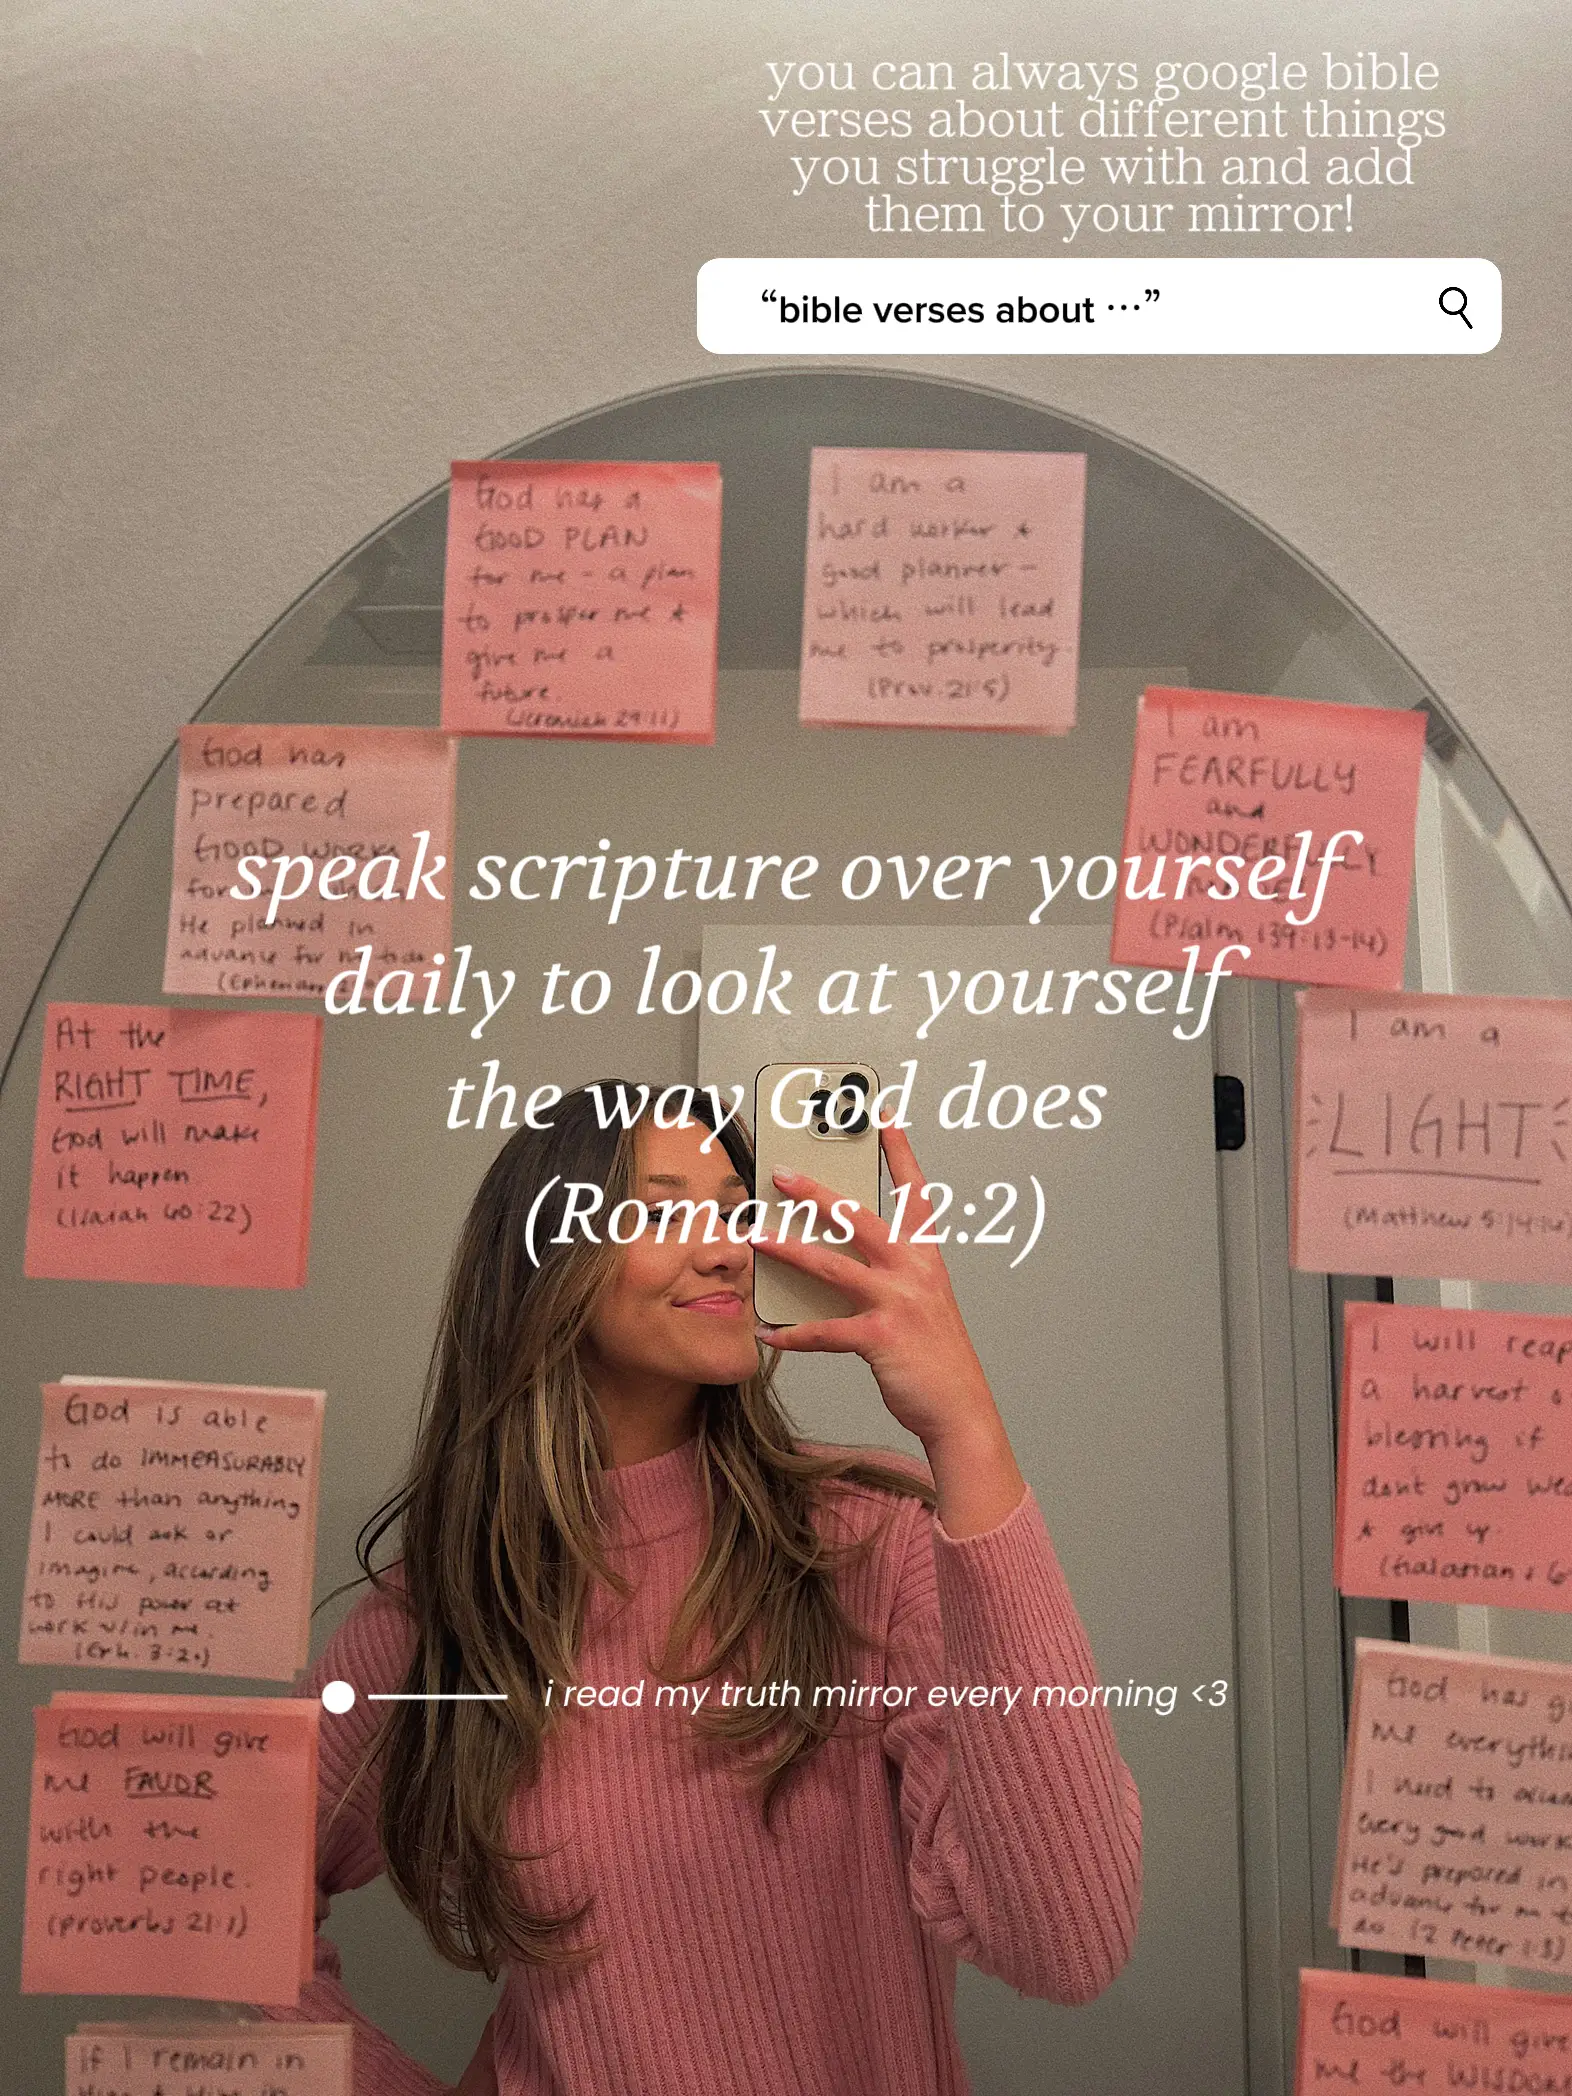  A woman taking a selfie in front of a mirror with a sign that says "speak scripture over yourself".